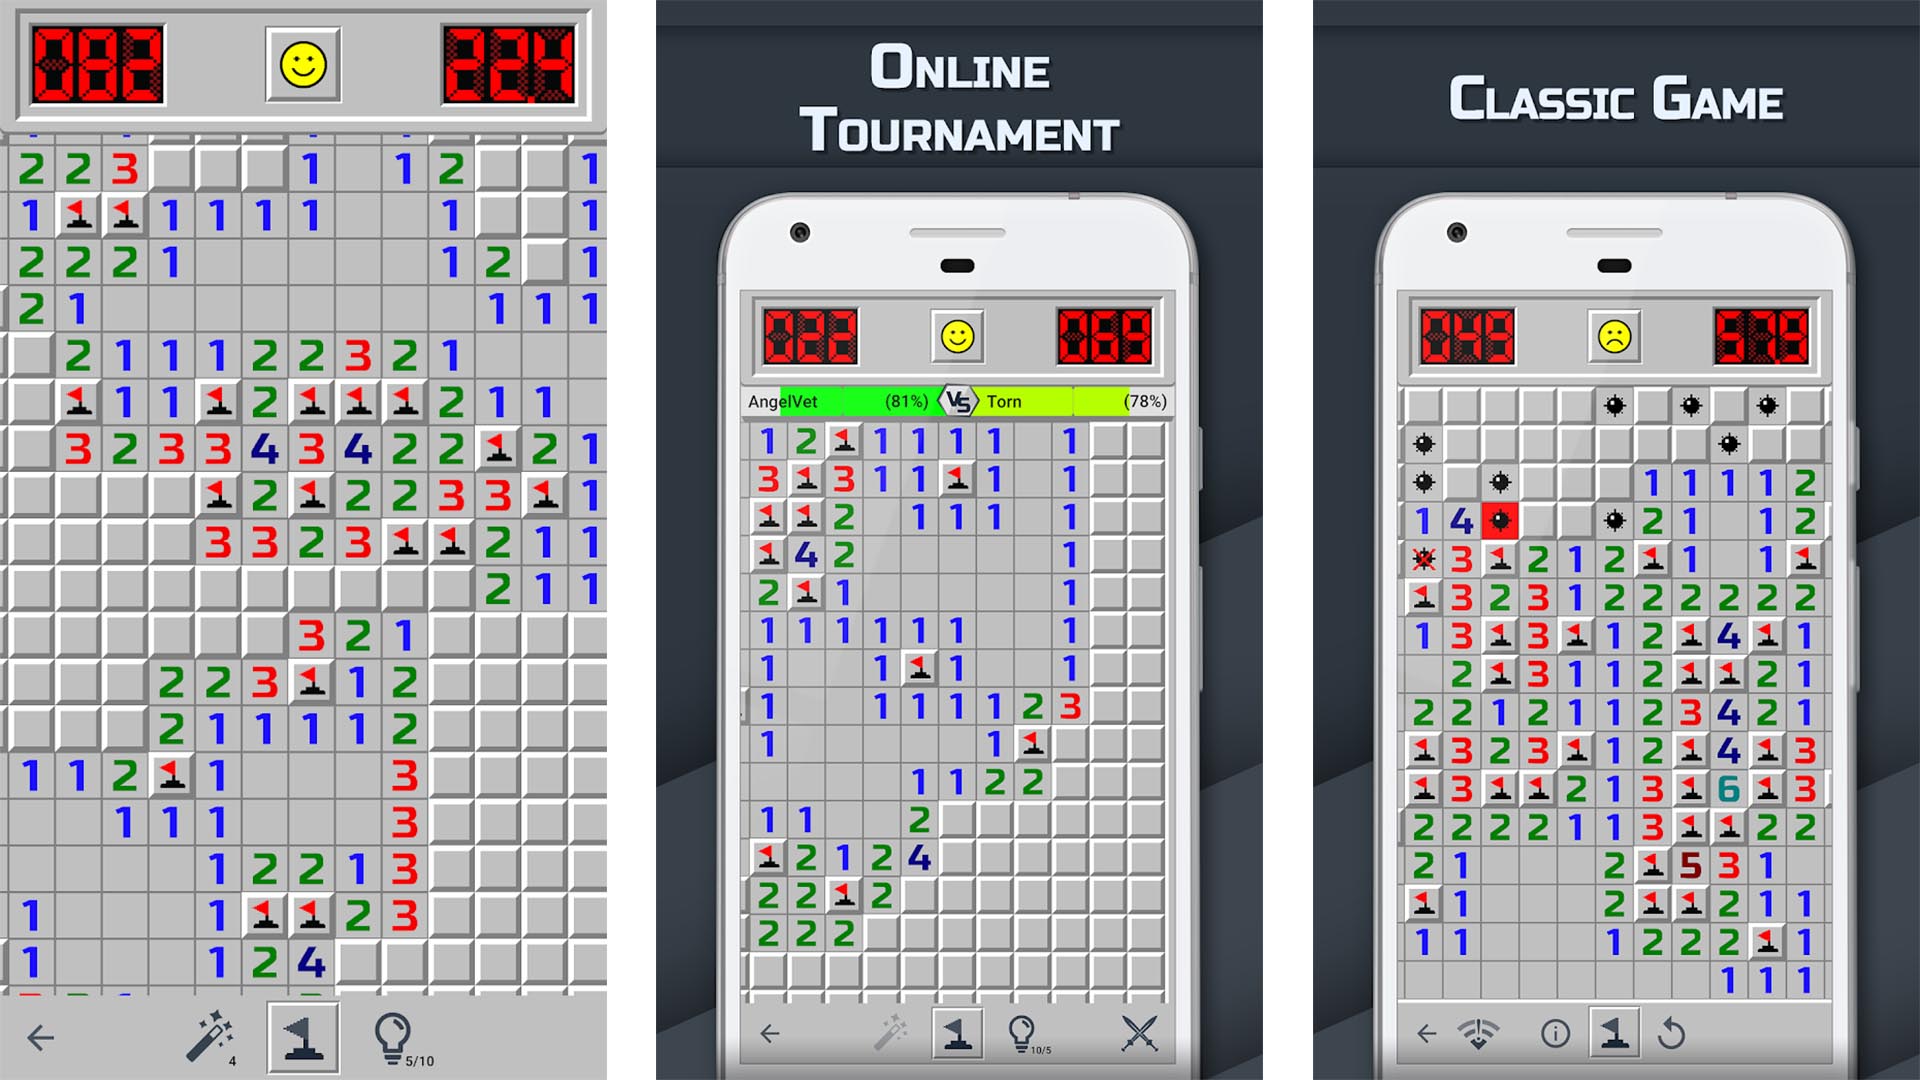 Google Play Games App: Play Classic Games Offline  We love a good blast  from the past 💥 Play games like Solitaire, Minesweeper, Snake, PAC-MAN,  Cricket, and Whirlybird 👾🕹 even when you're